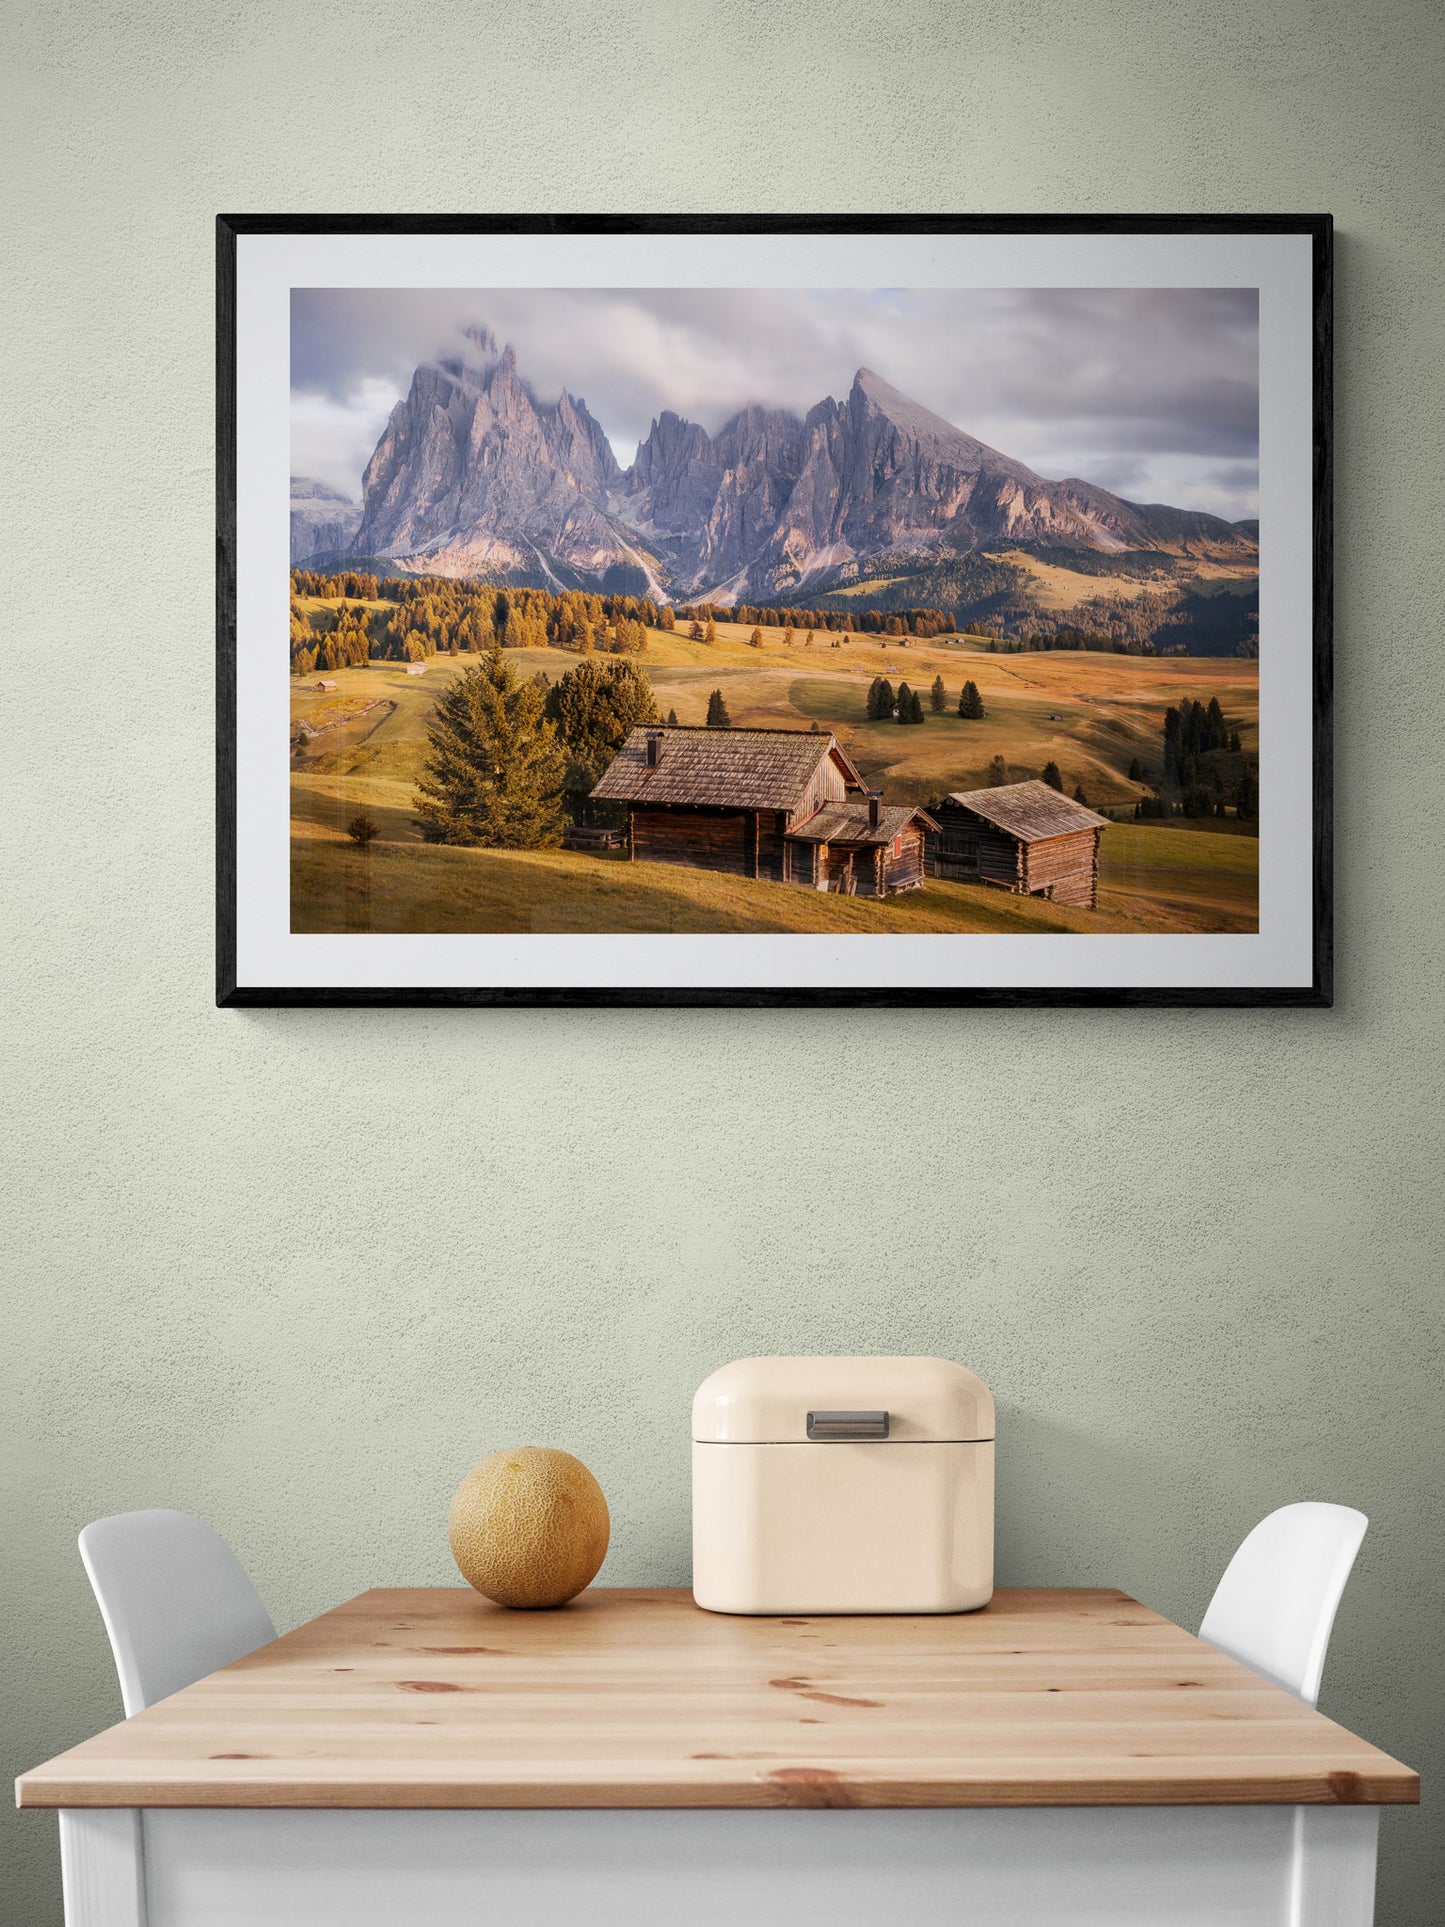 Image Title: A Tyrol Tidbit Photographer: Marcus Danz Location: Alpe di Siusi, Italy Image description: While increasingly dense clouds pass by the peaks of the mighty Sassolungo group, the pasture catches the warm light of the soon-to-set sun one more time. High quality Fine Art print up to 36 inch / around 90 centimeters on Hahnemühle paper available. Large variant over kitchen table.